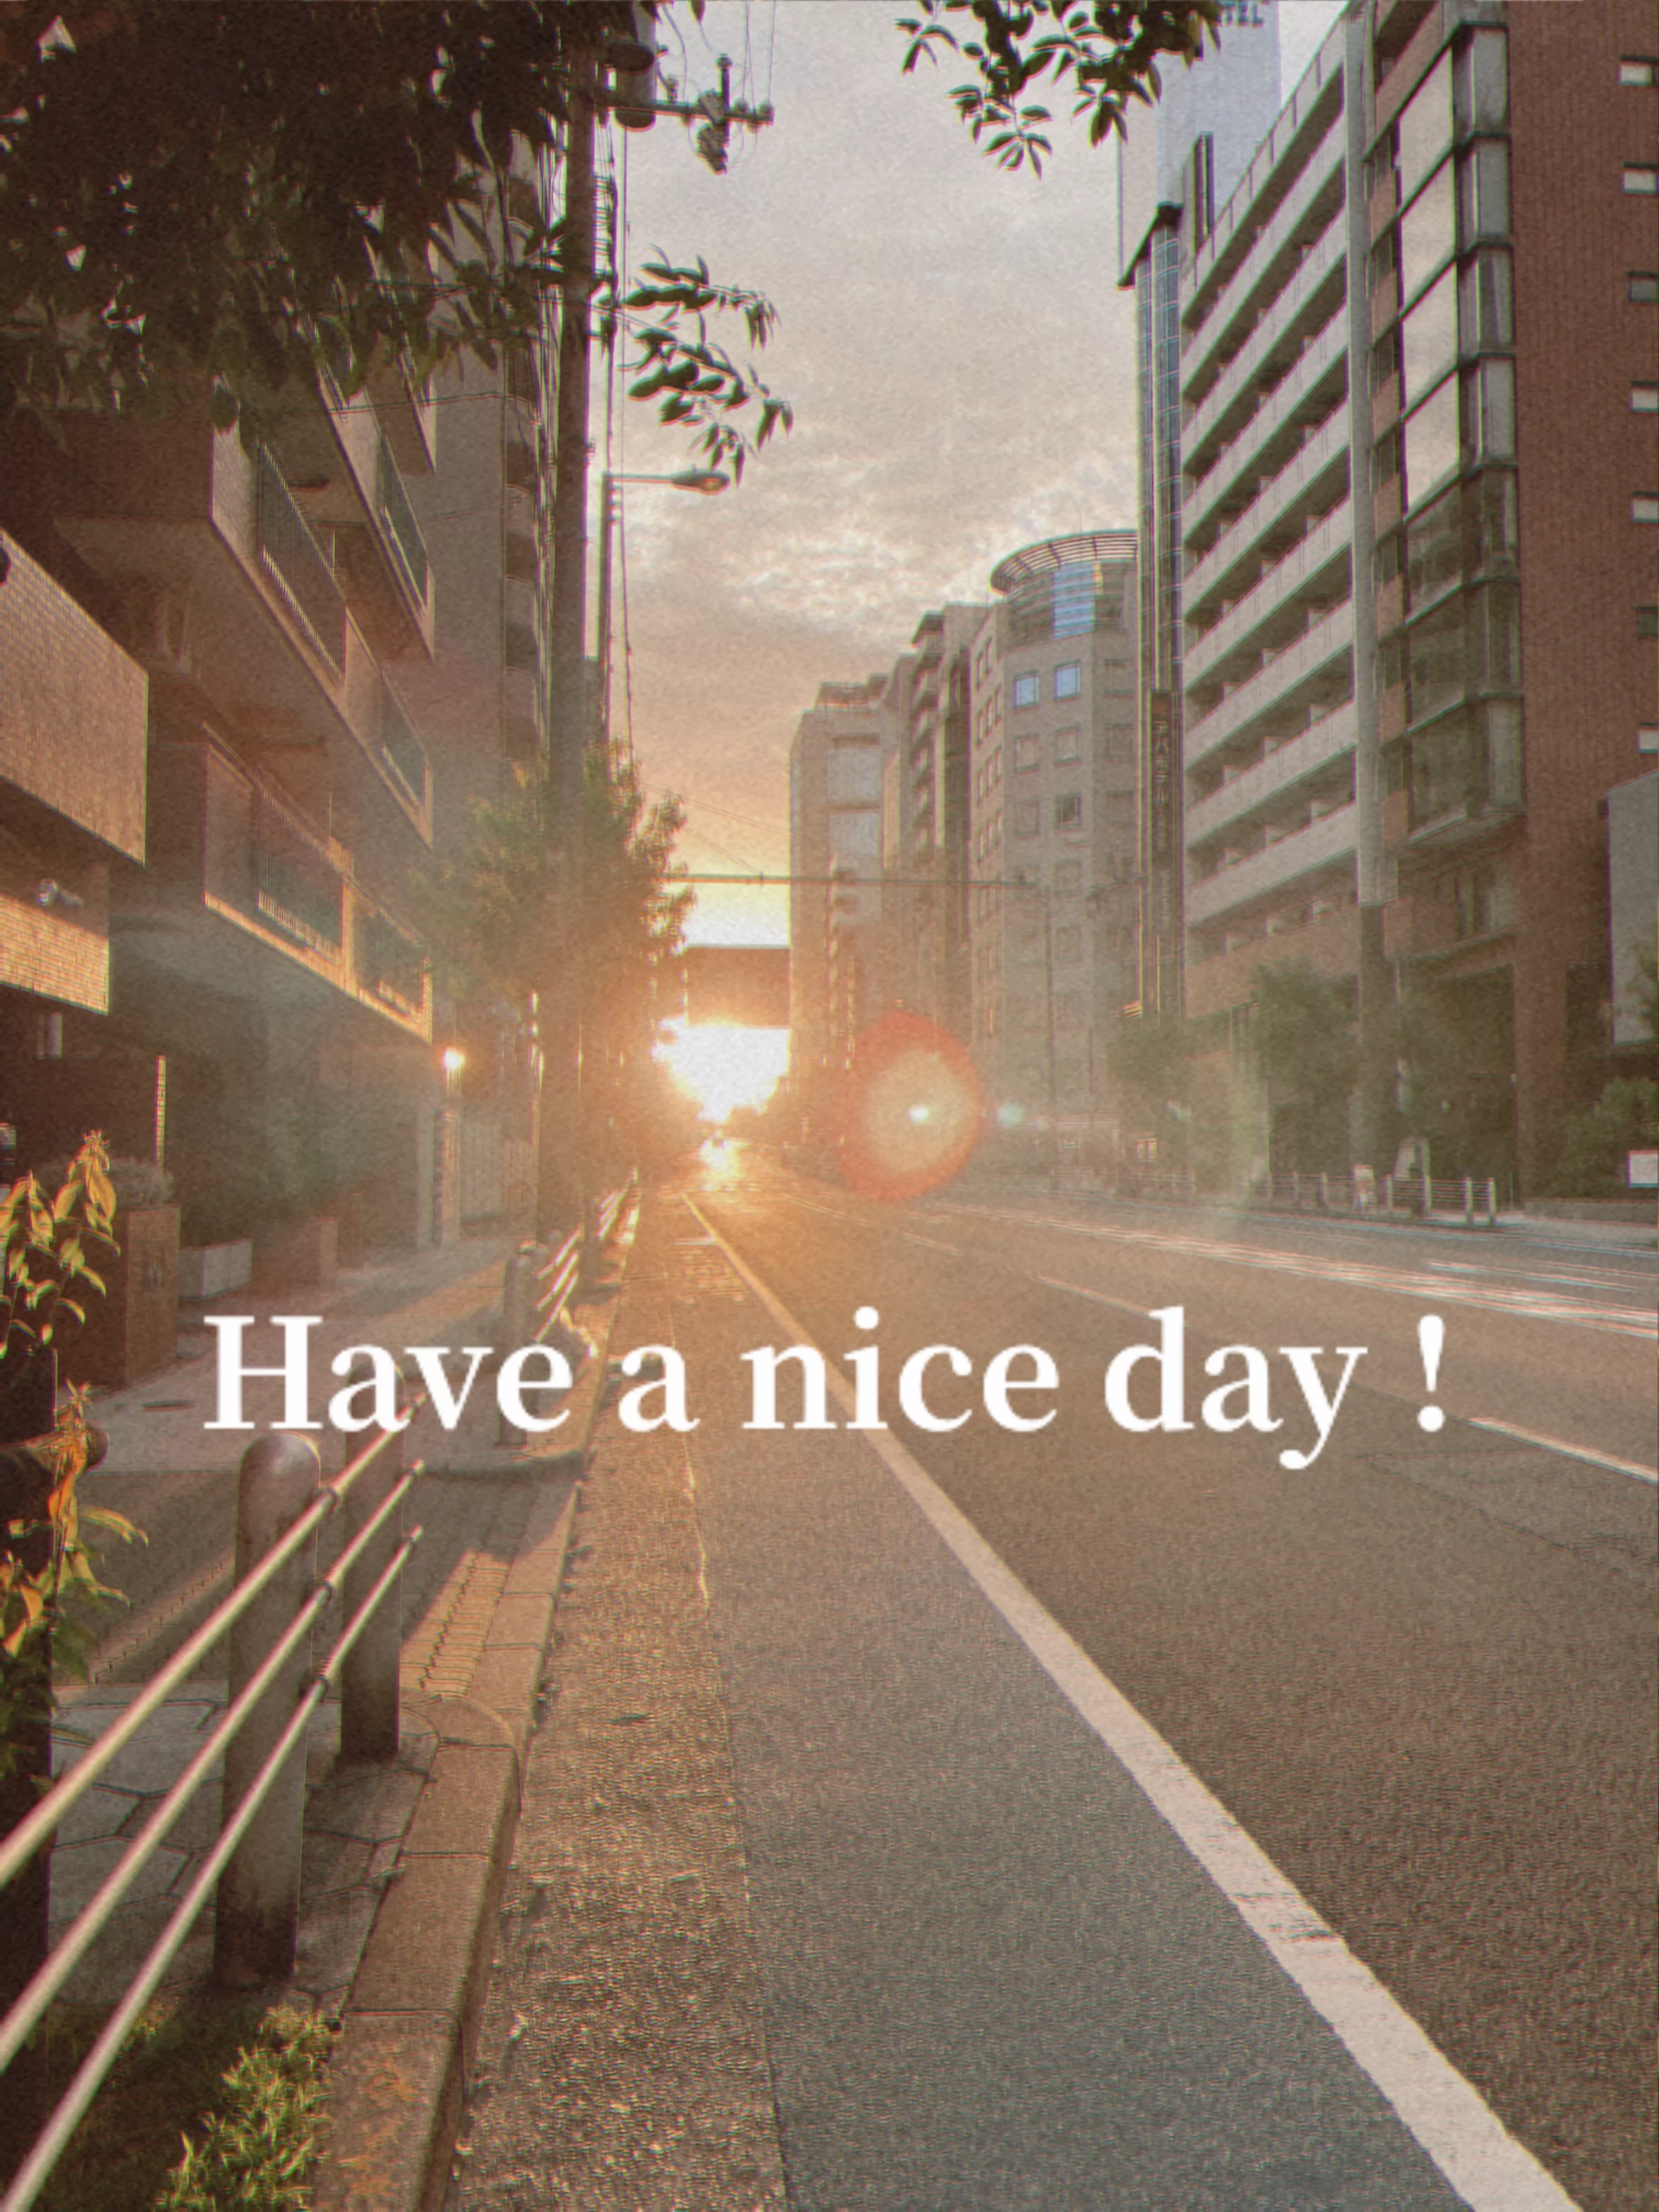 Have a nice day！